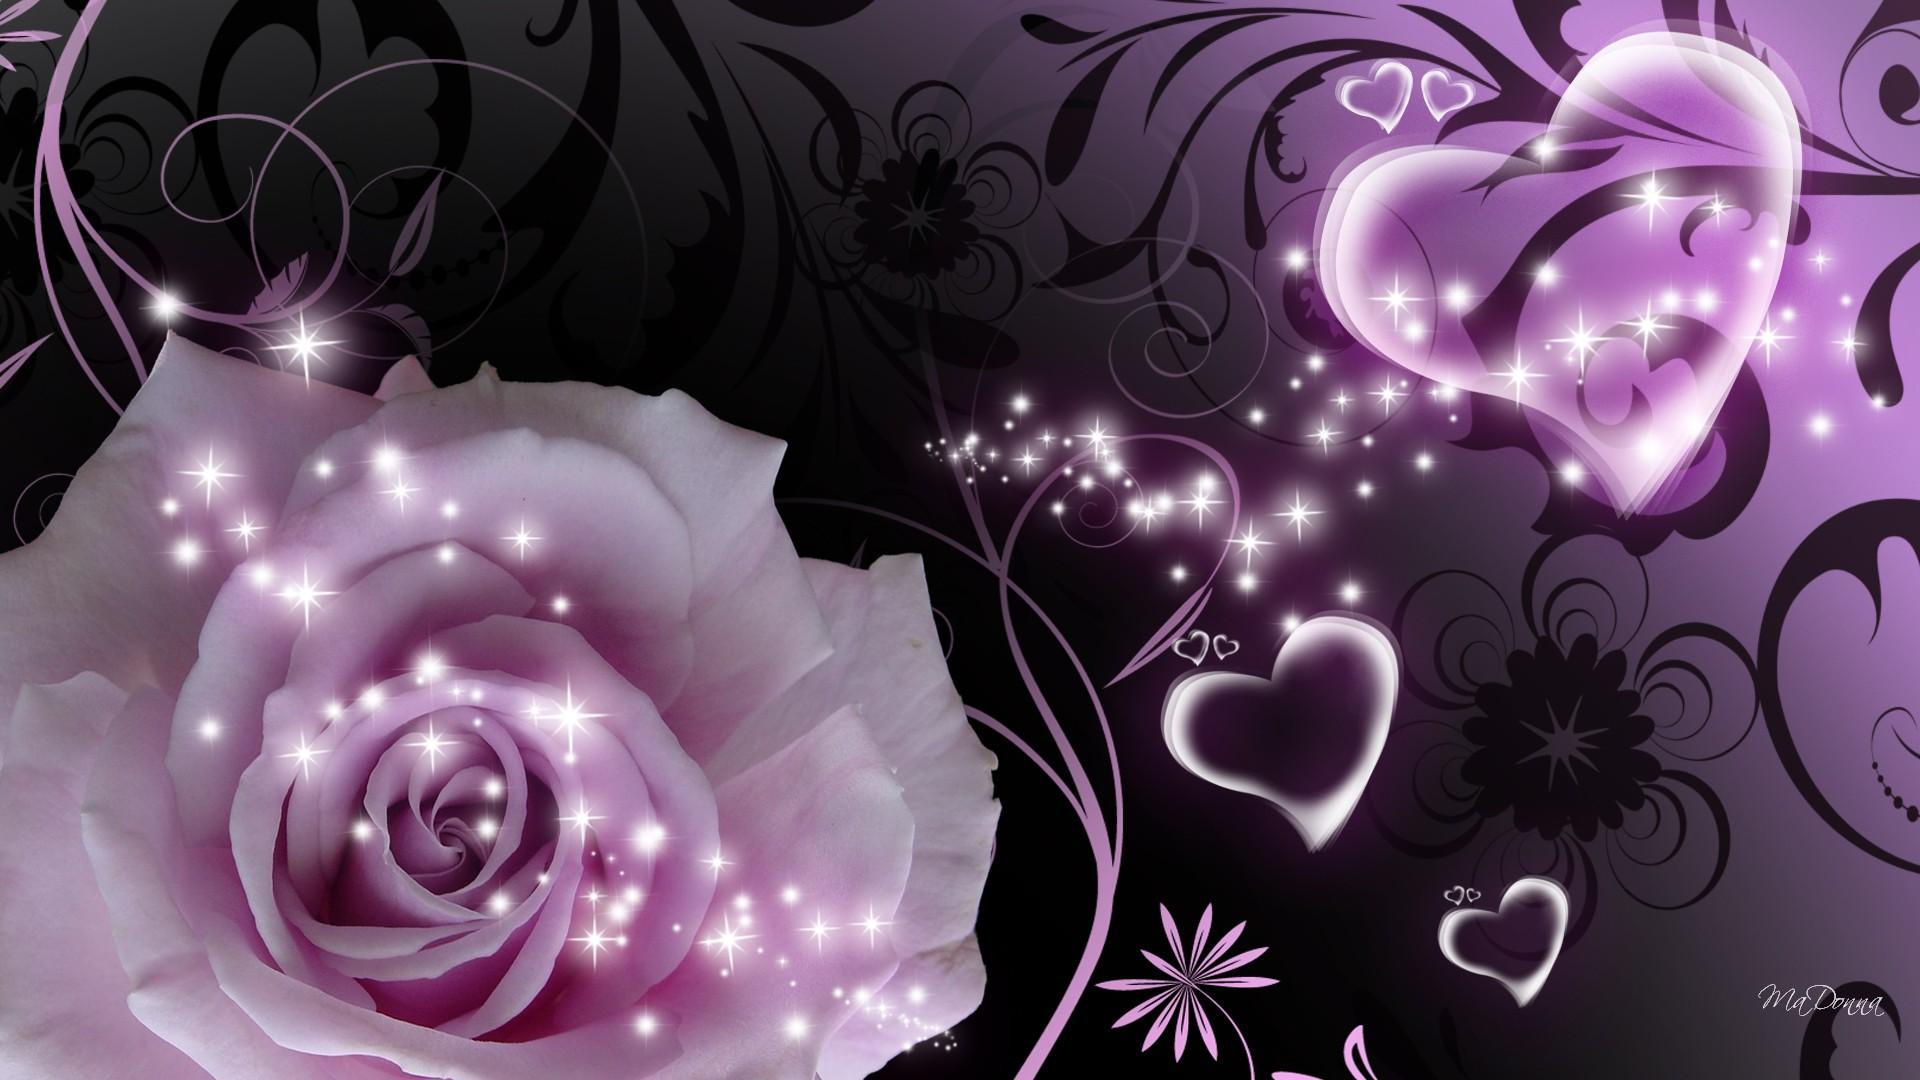 Purple rose and heart, a beautiful picture wallpaper and image